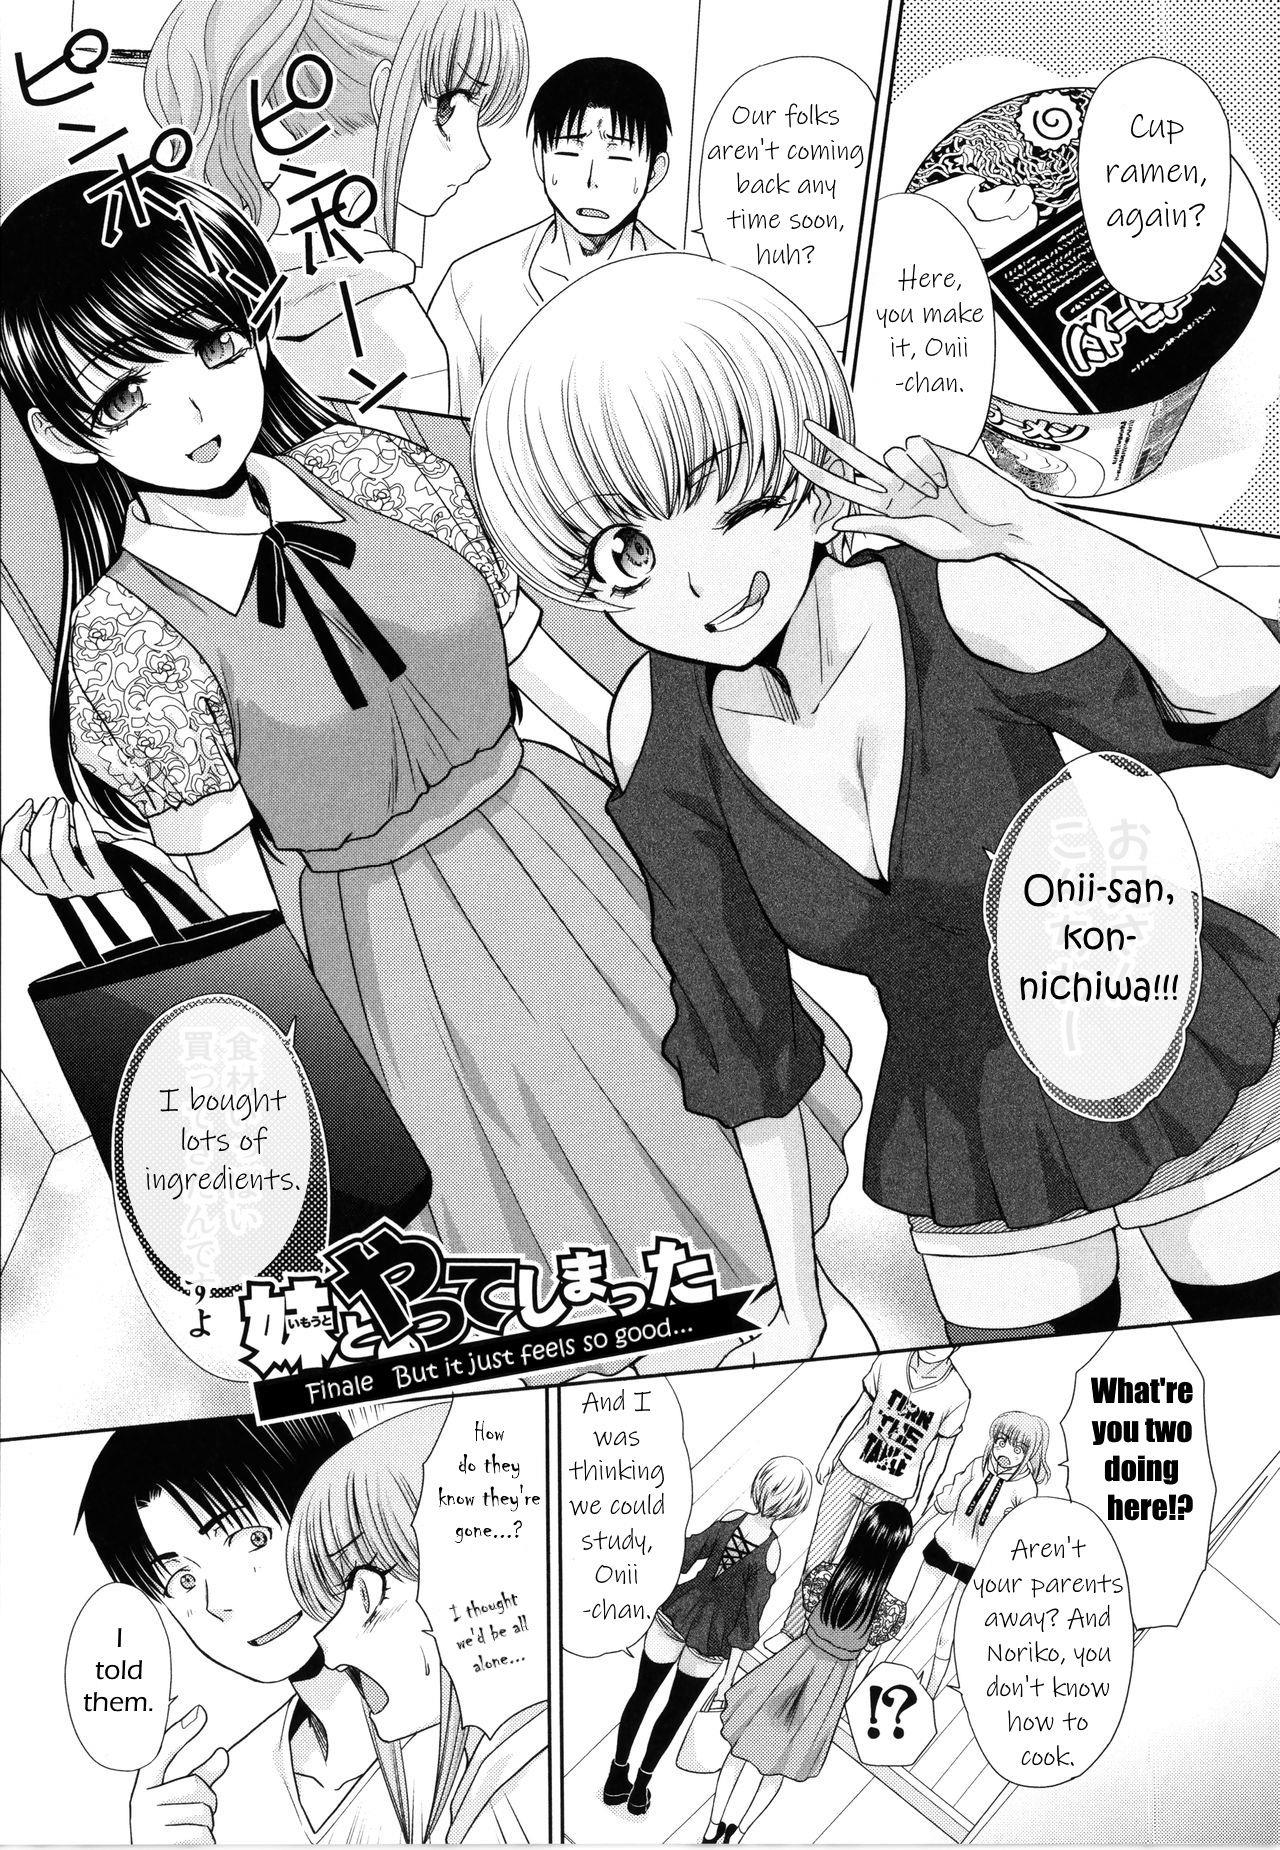 I Had Sex With My Sister And Then I Had Sex With Her Friends Vol.1 Chapter 10: But It Feels So Good... - Picture 1